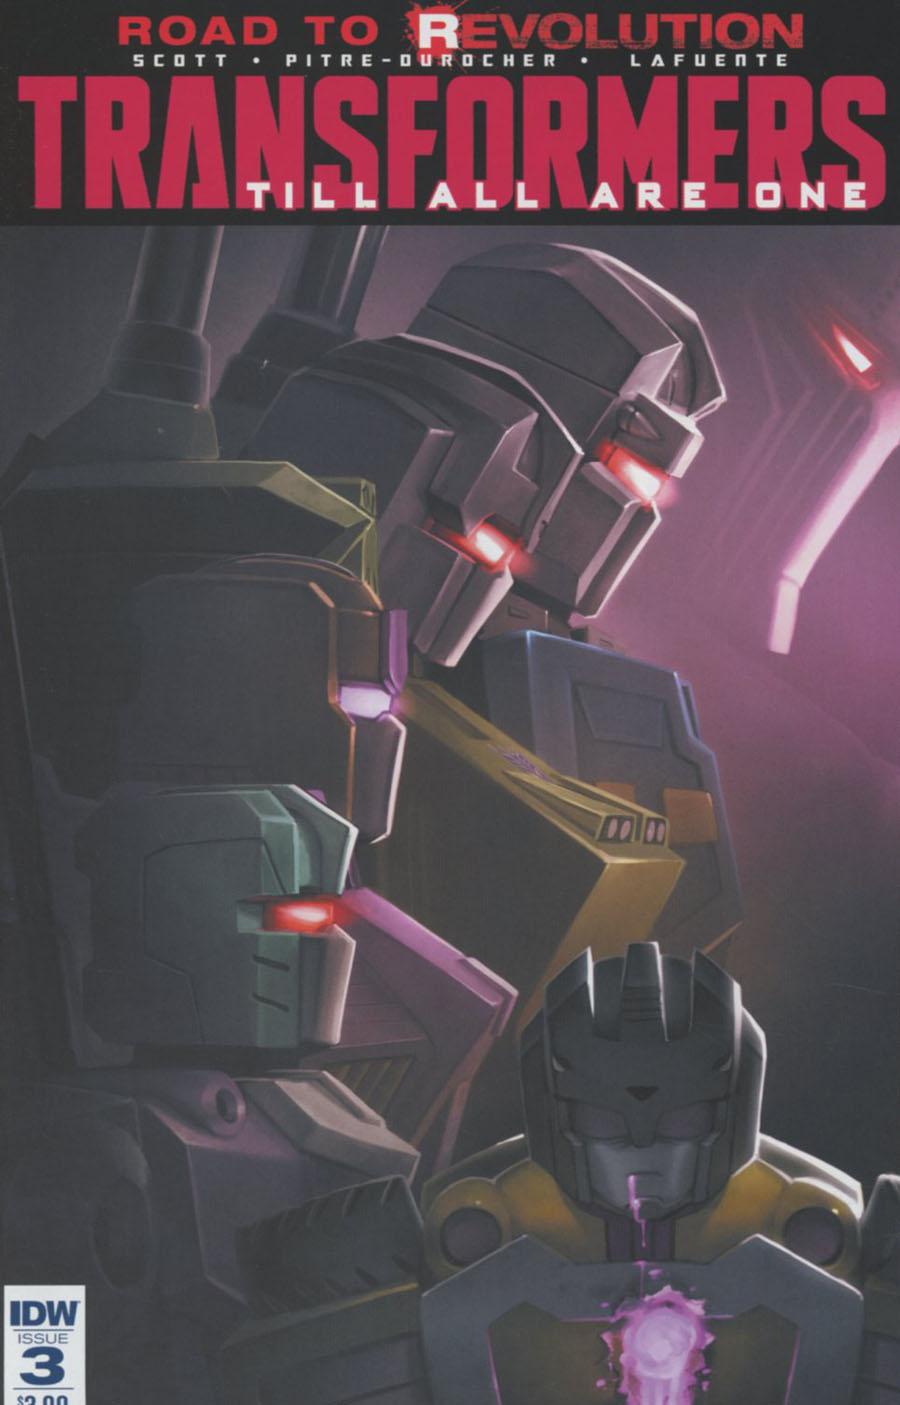 Transformers Till All Are One Vol. 1 #3